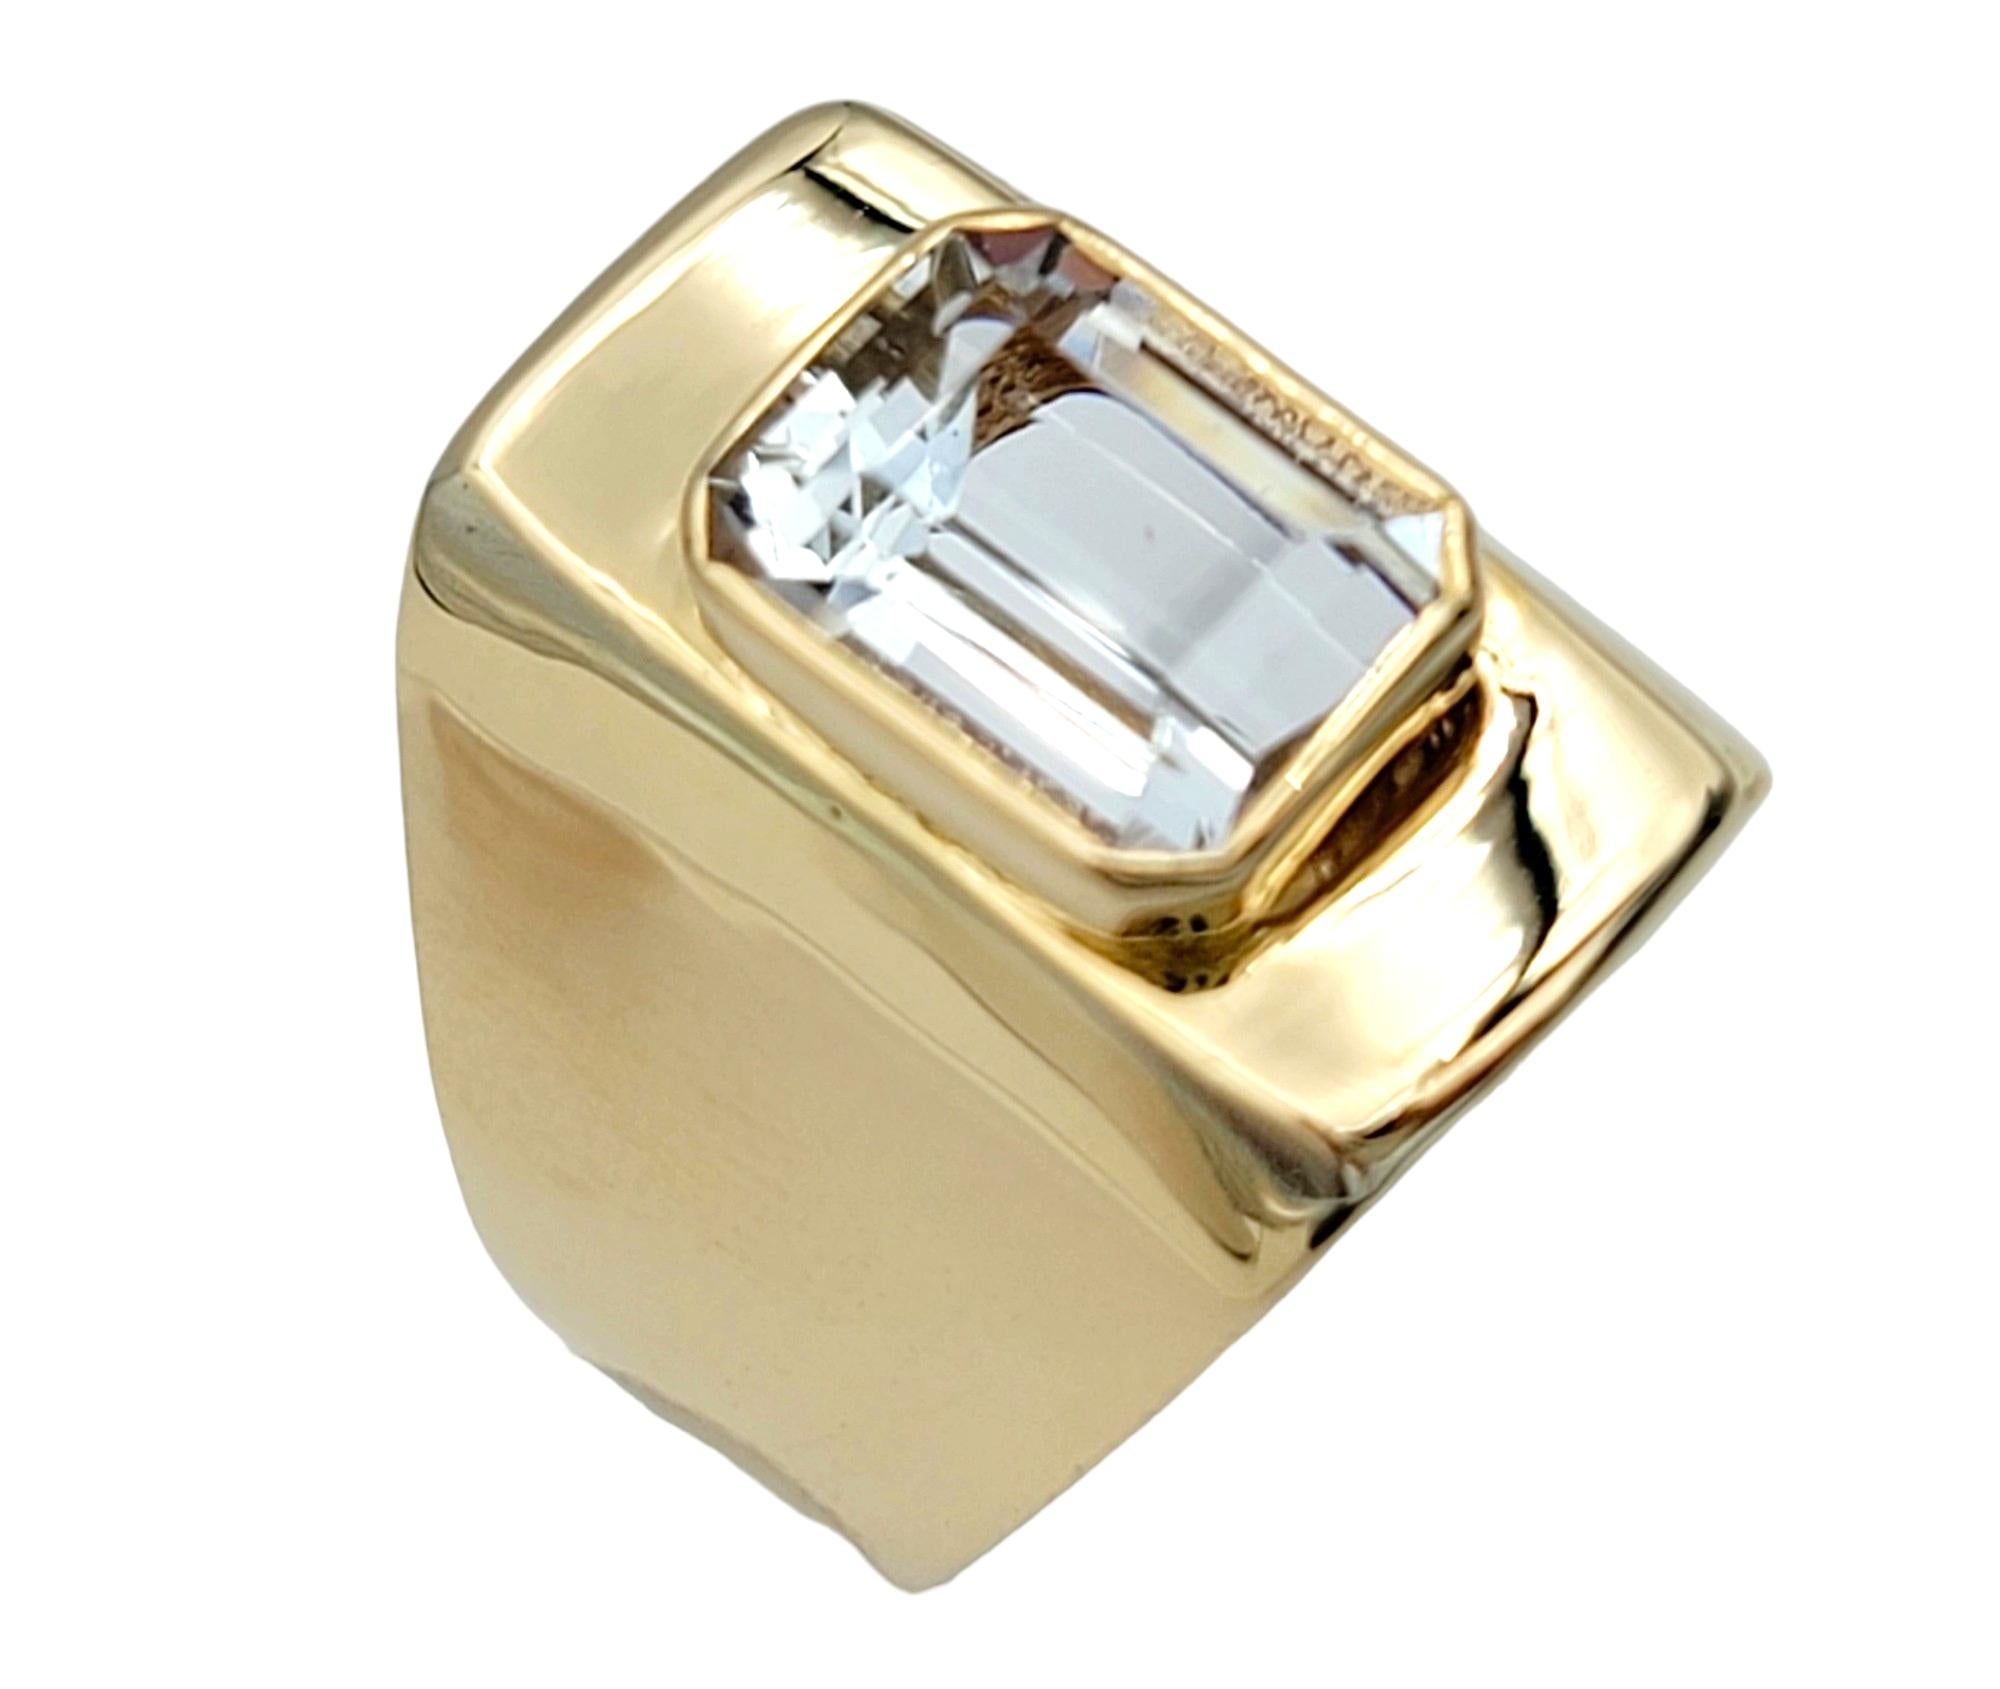 Emerald Cut Goshenite Beryl Solitaire Cocktail Ring Set in 14 Karat Yellow Gold In Good Condition For Sale In Scottsdale, AZ